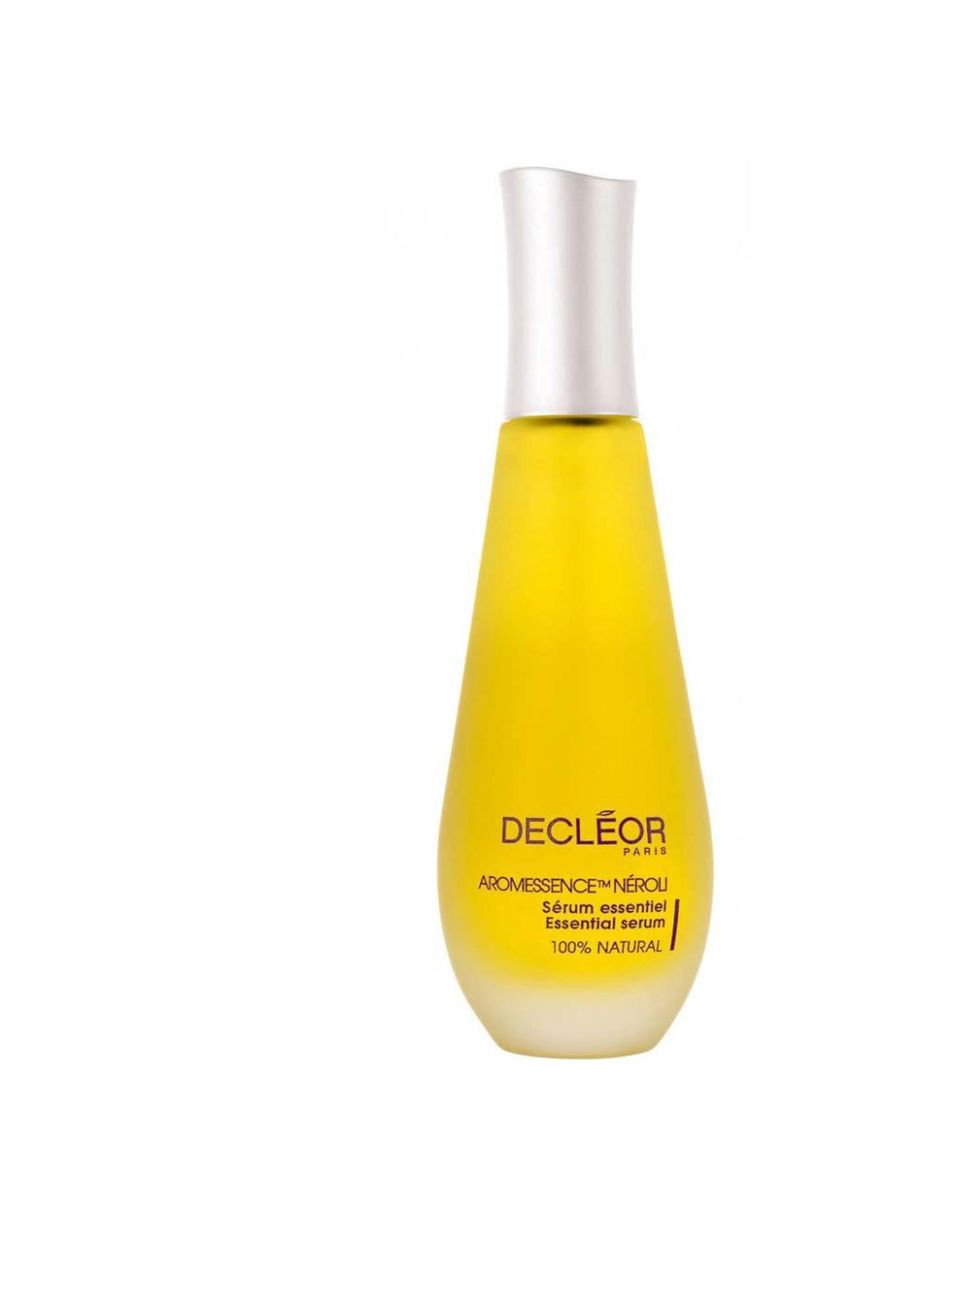 <p><a href="http://www.decleor.co.uk/products/aromessence-neroli">Decleor Aromessence Neroli Facial oil, &pound;44</a></p>

<p>Renowned for its skin healing properties, this face elixir uses natural essential oils to restore your skin&rsquo;s natural glow